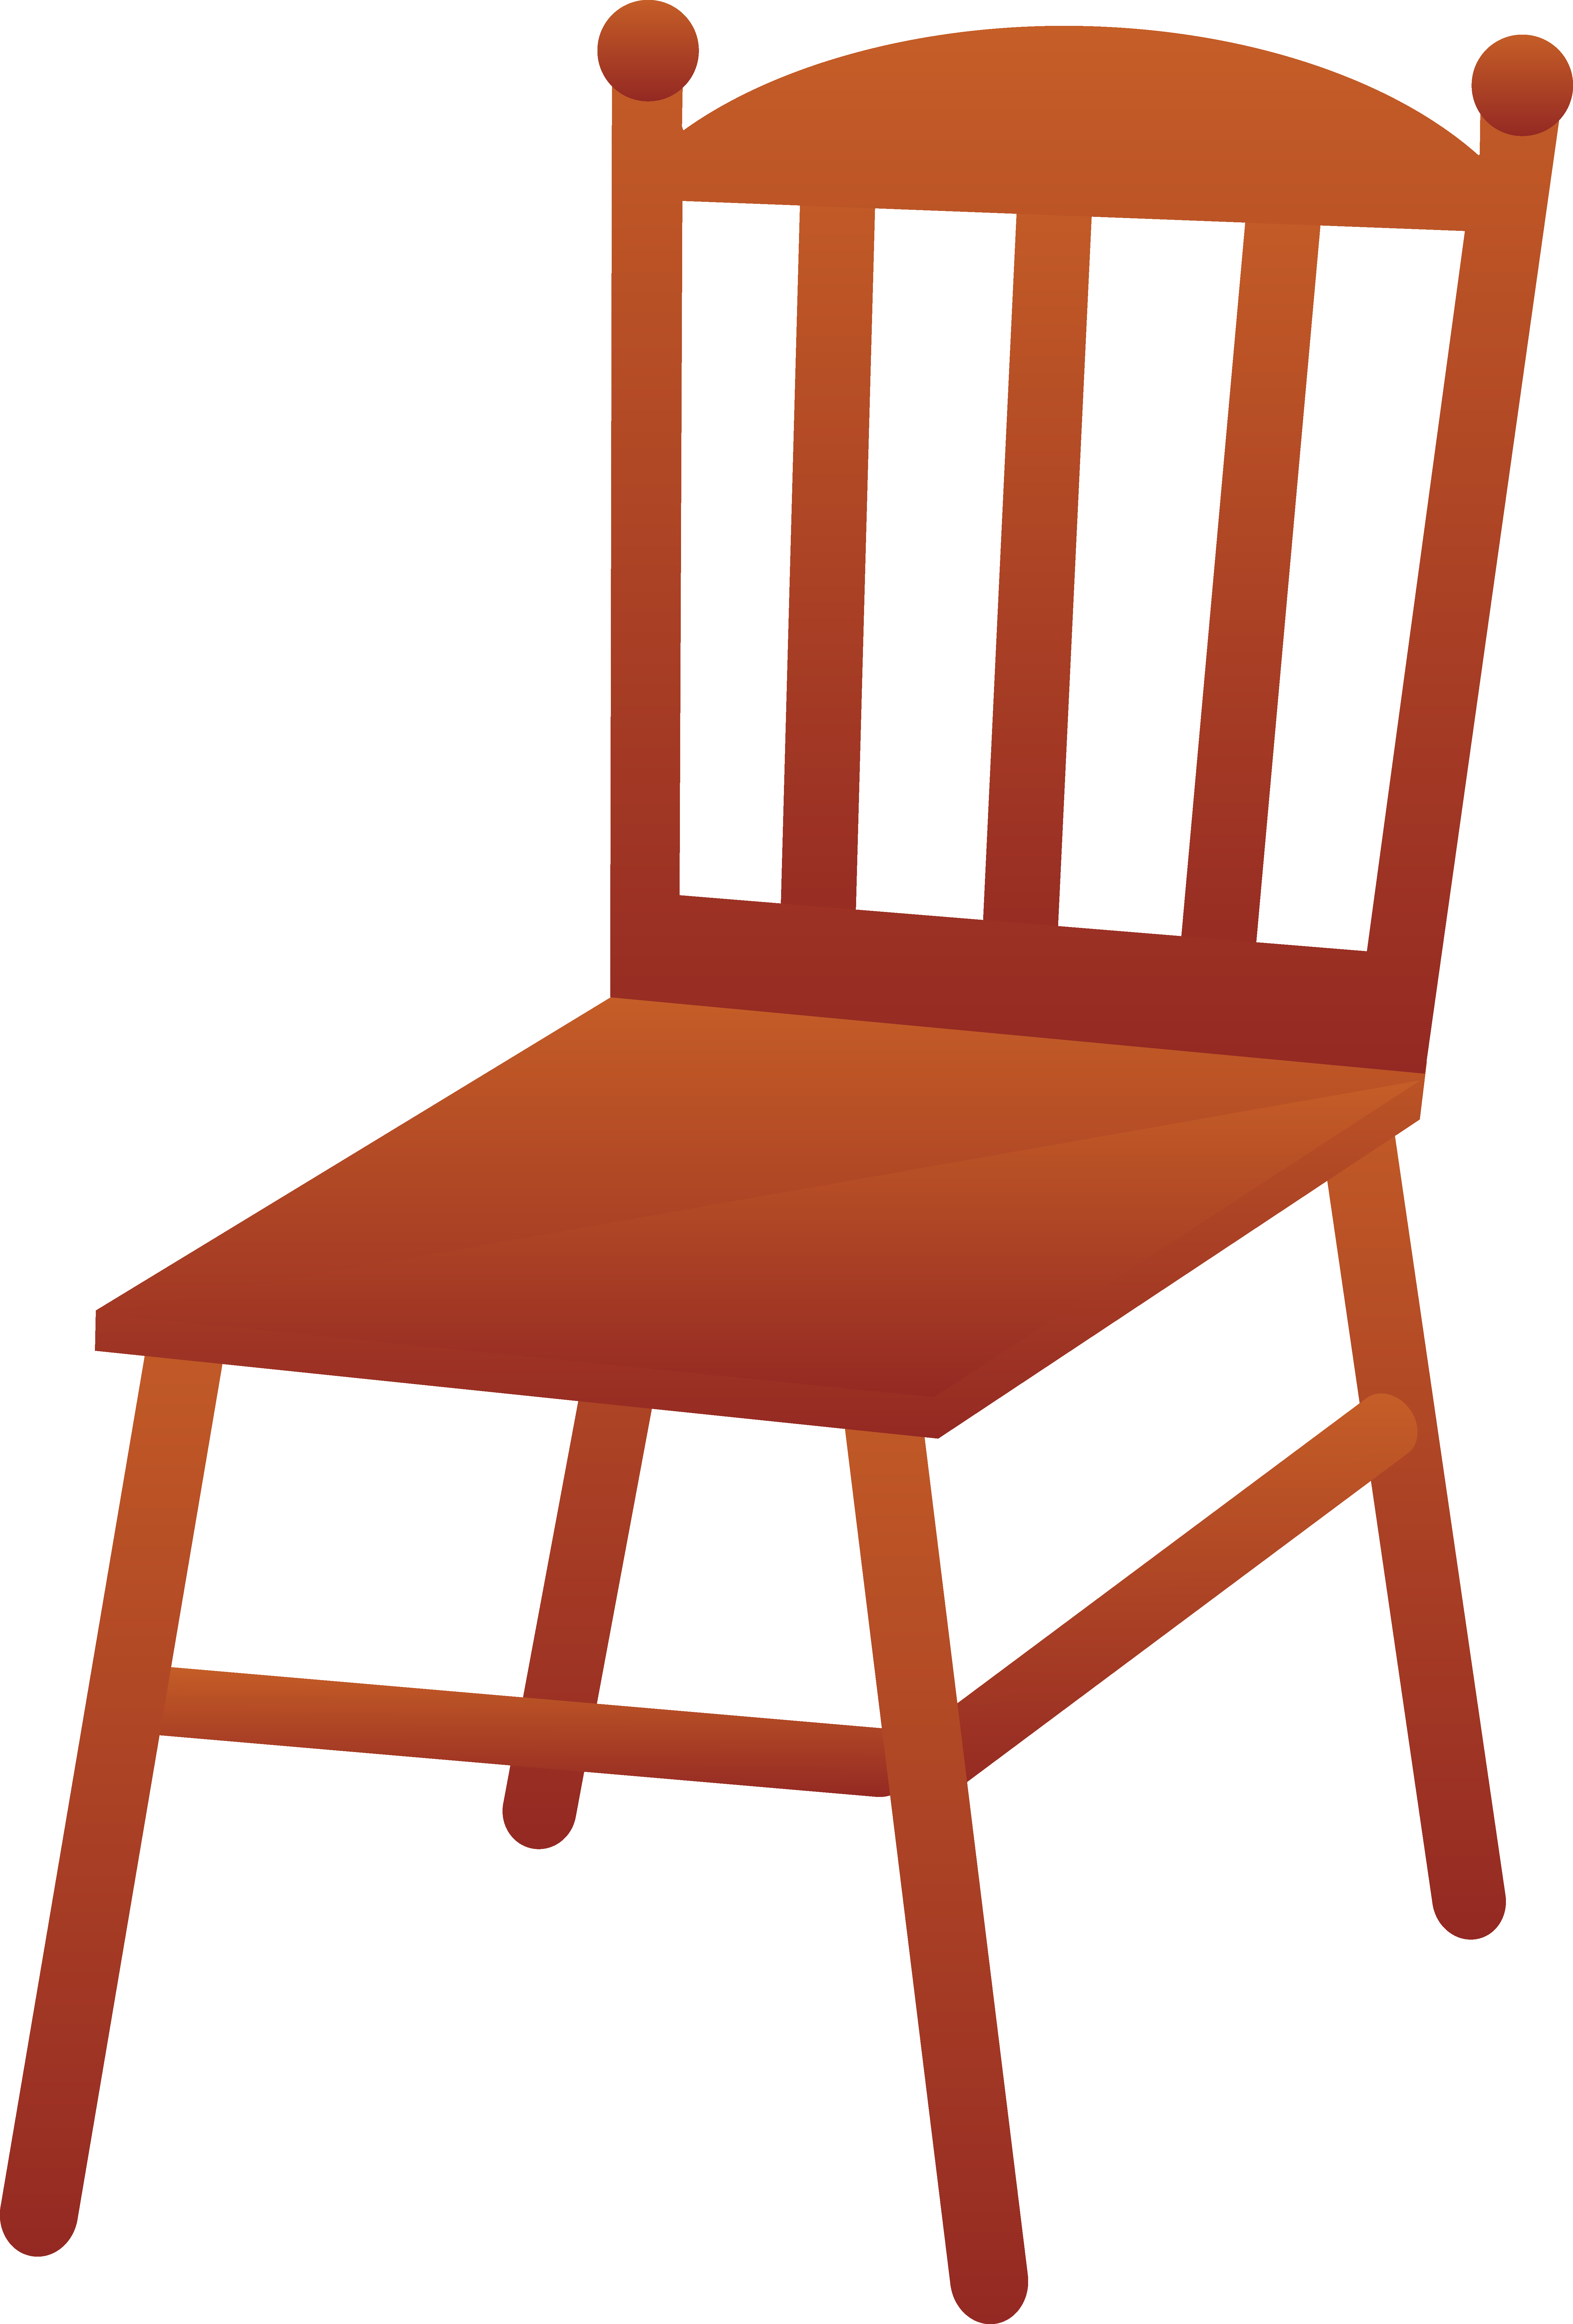 Chair Clipart Black And White - Free Clipart Images